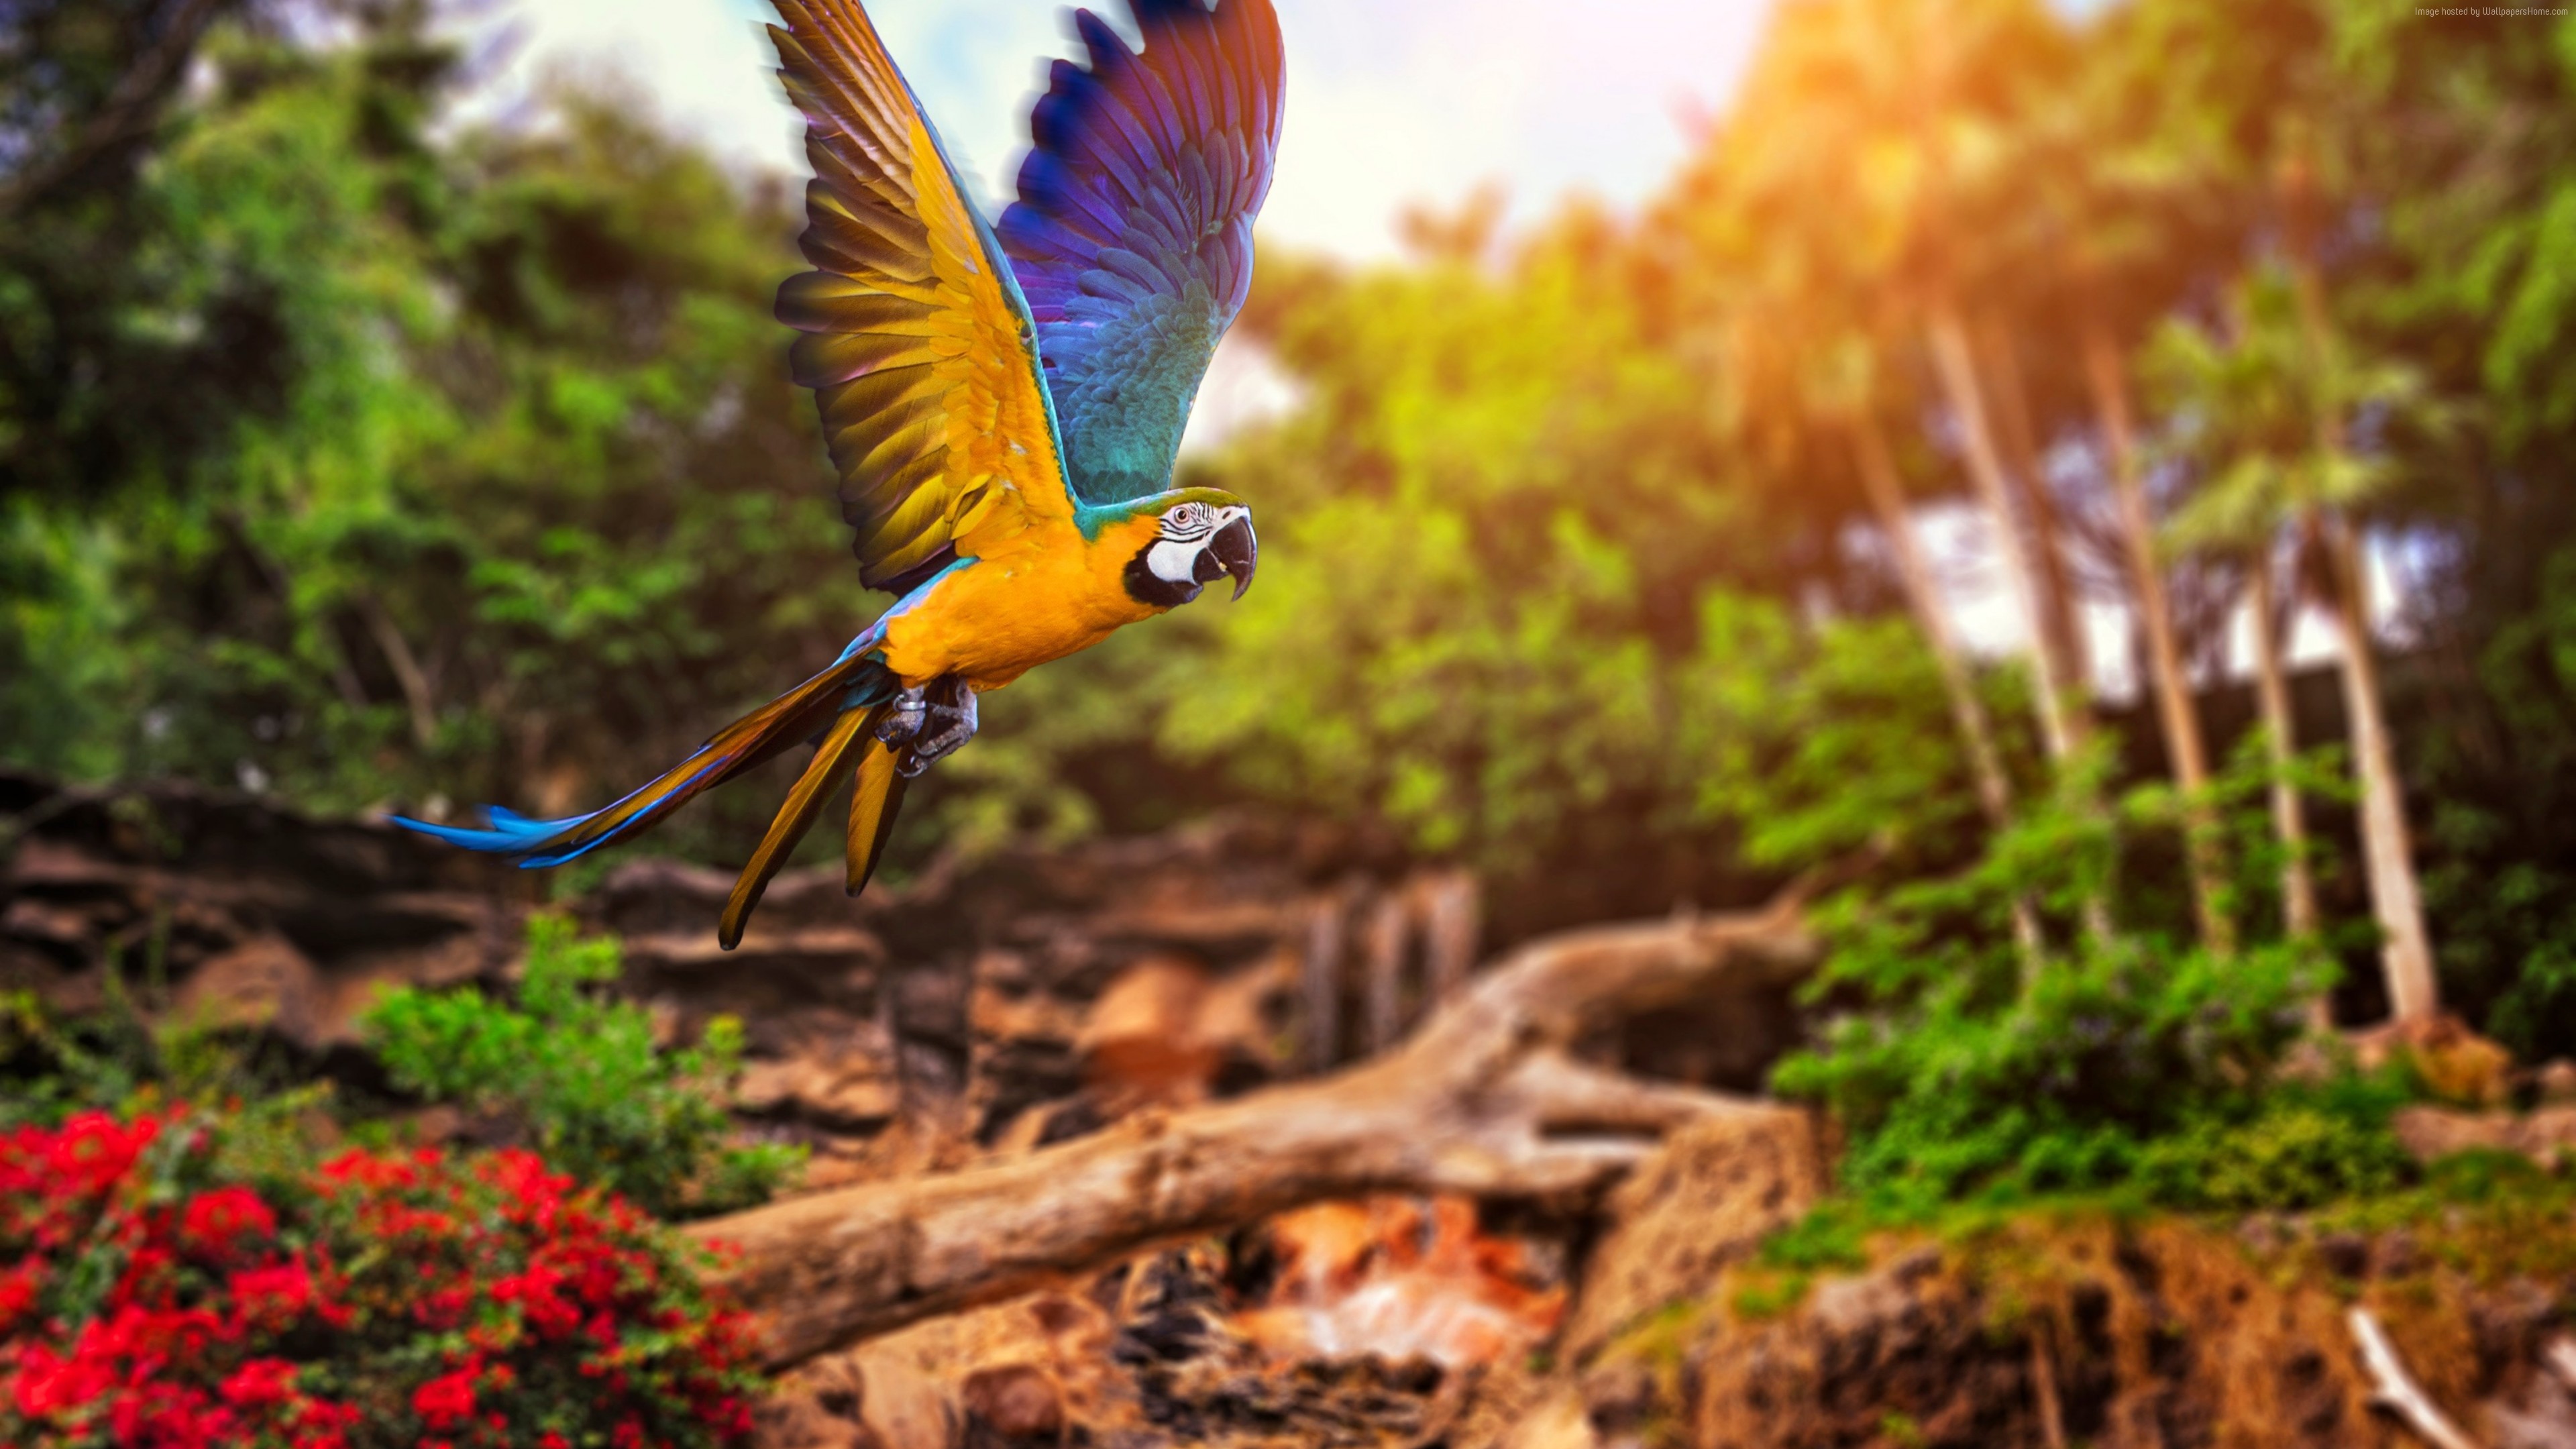 General 3840x2160 animals trees nature parrot Blue-and-Yellow Macaw macaws sunlight birds beak colorful